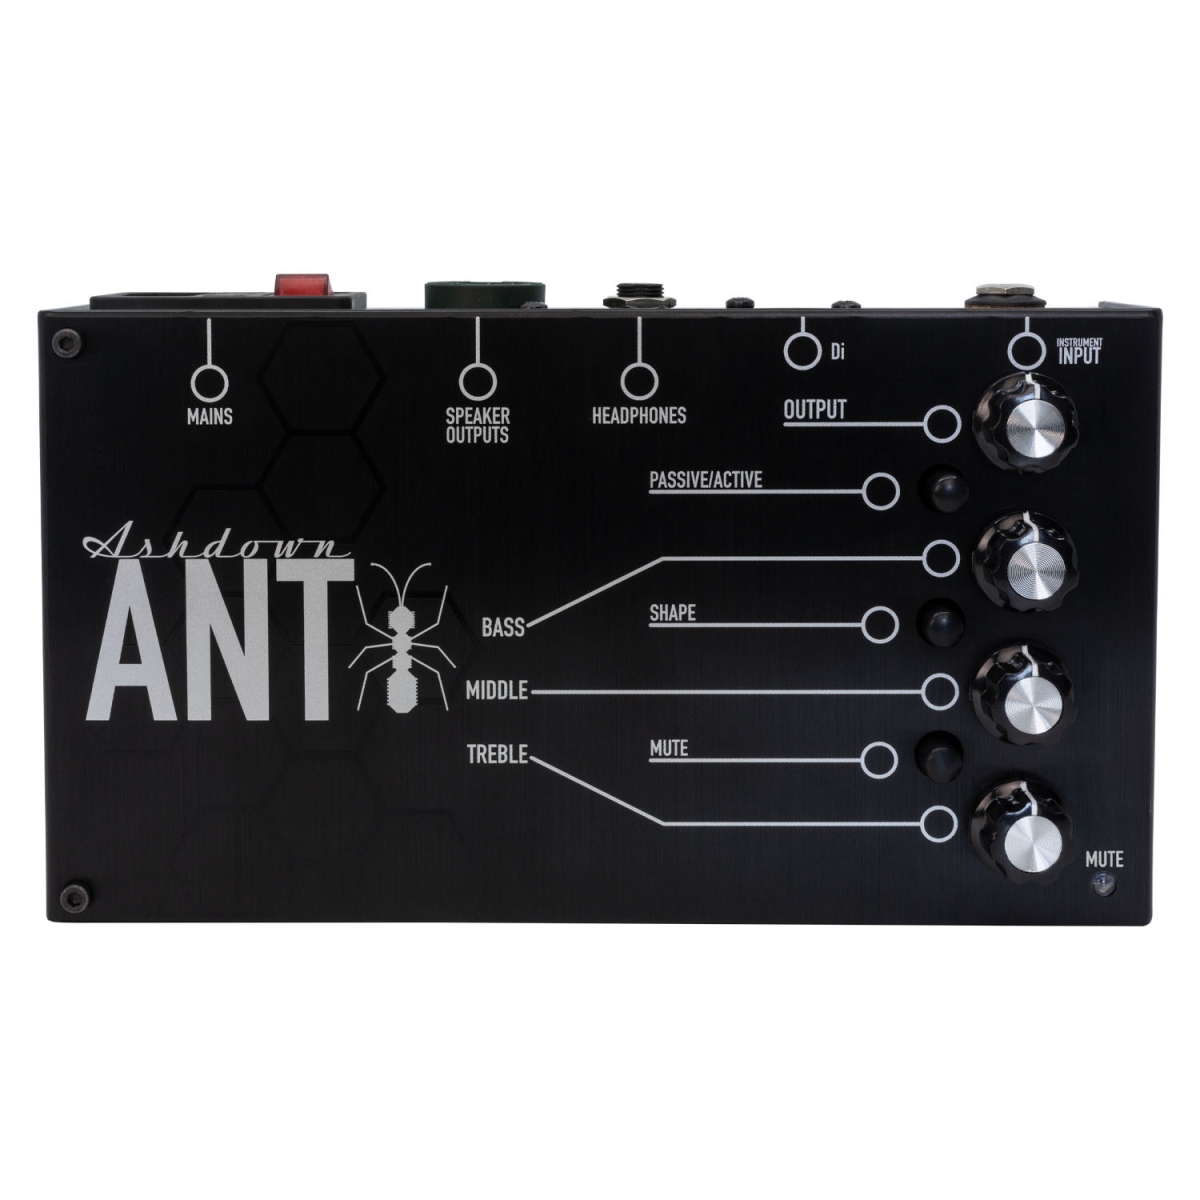 Picture of KMC Music ANT200-U 200 watts The Ant Pedal-board Bass Amplifier